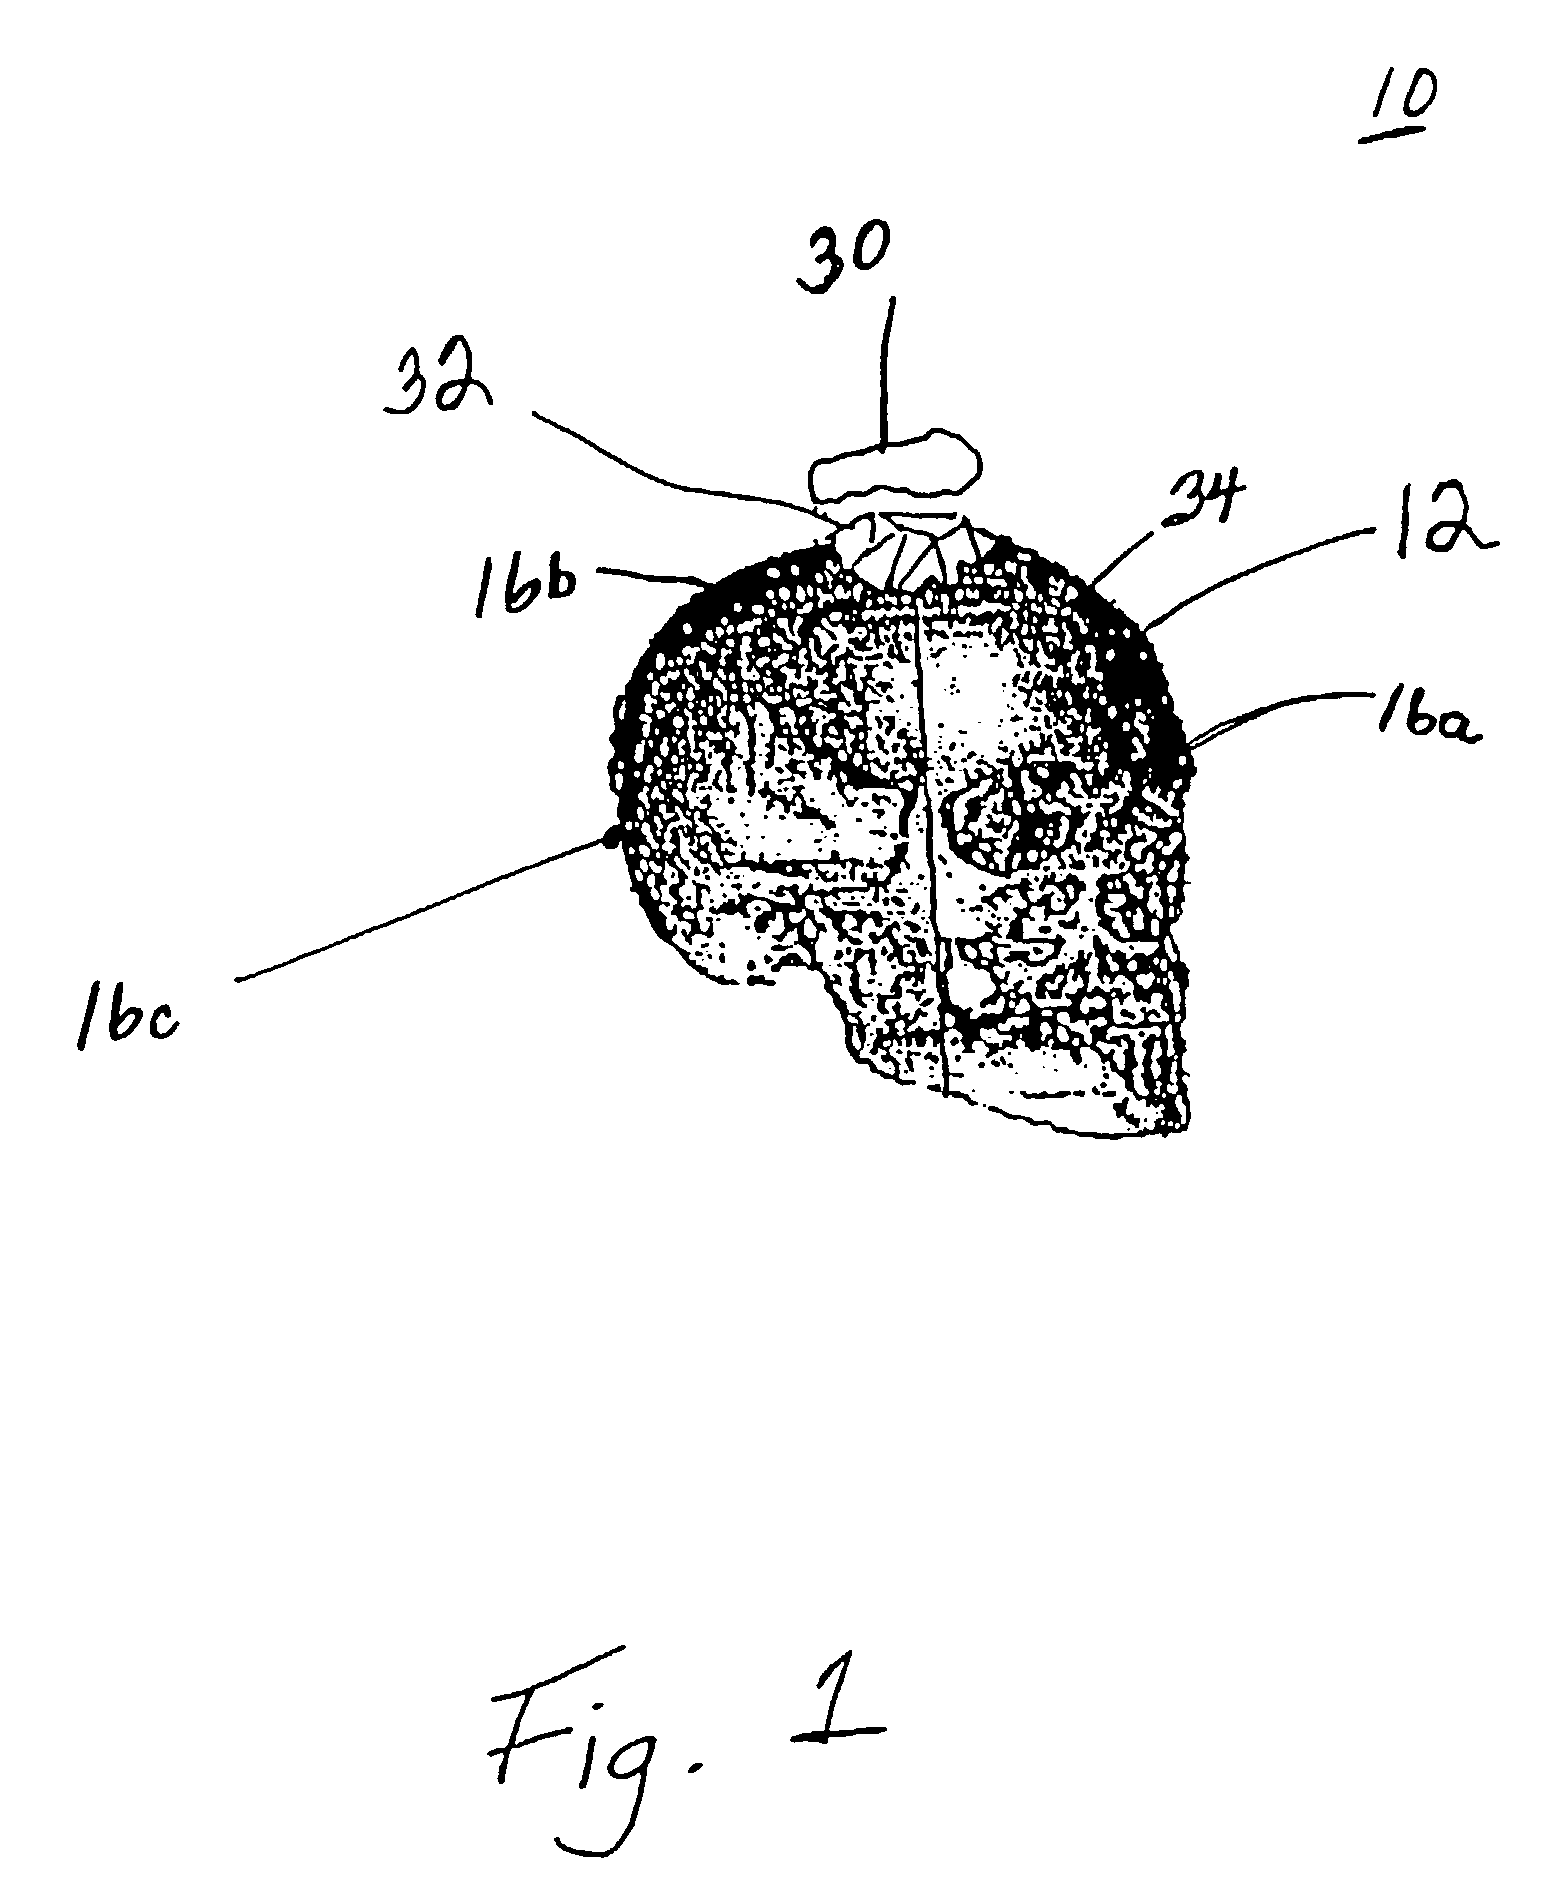 System and method for producing a three-dimensional model